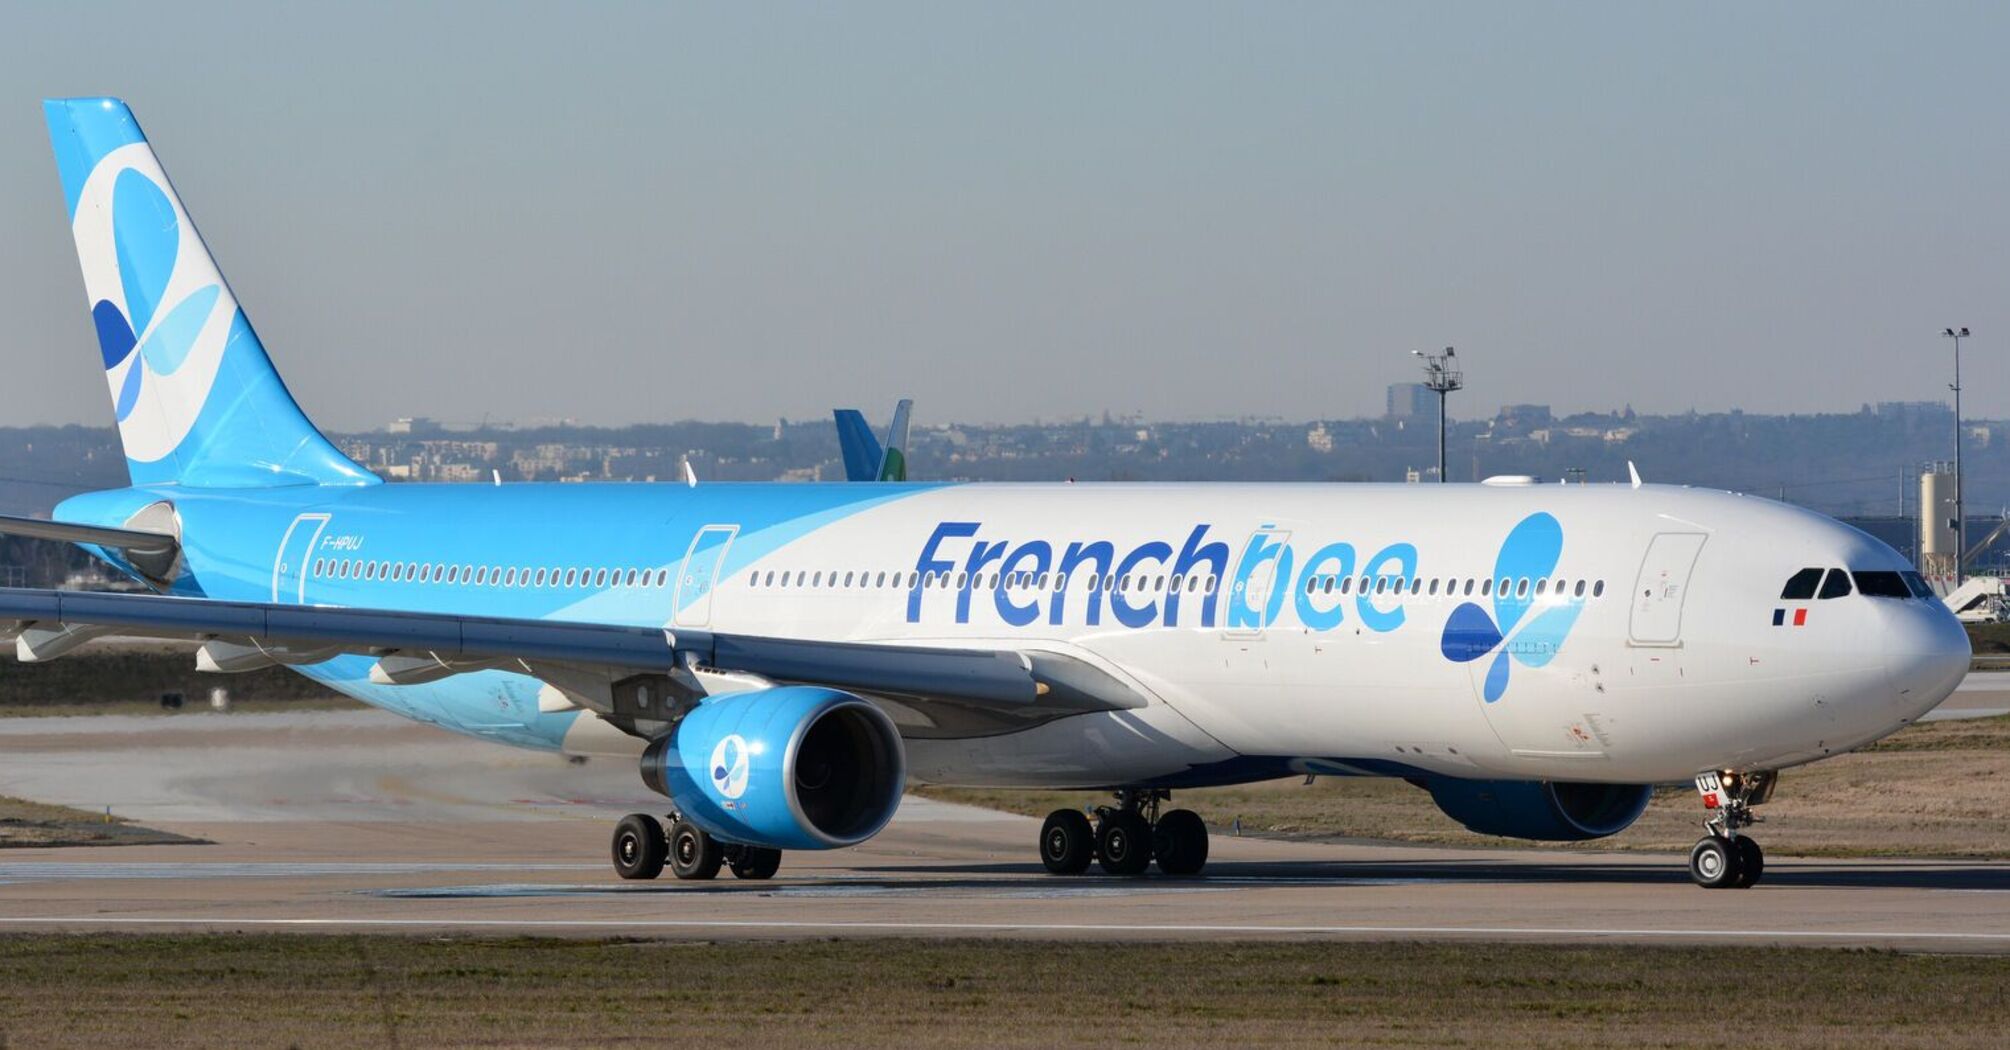 French Bee Compensation for Delayed or Cancelled Flights